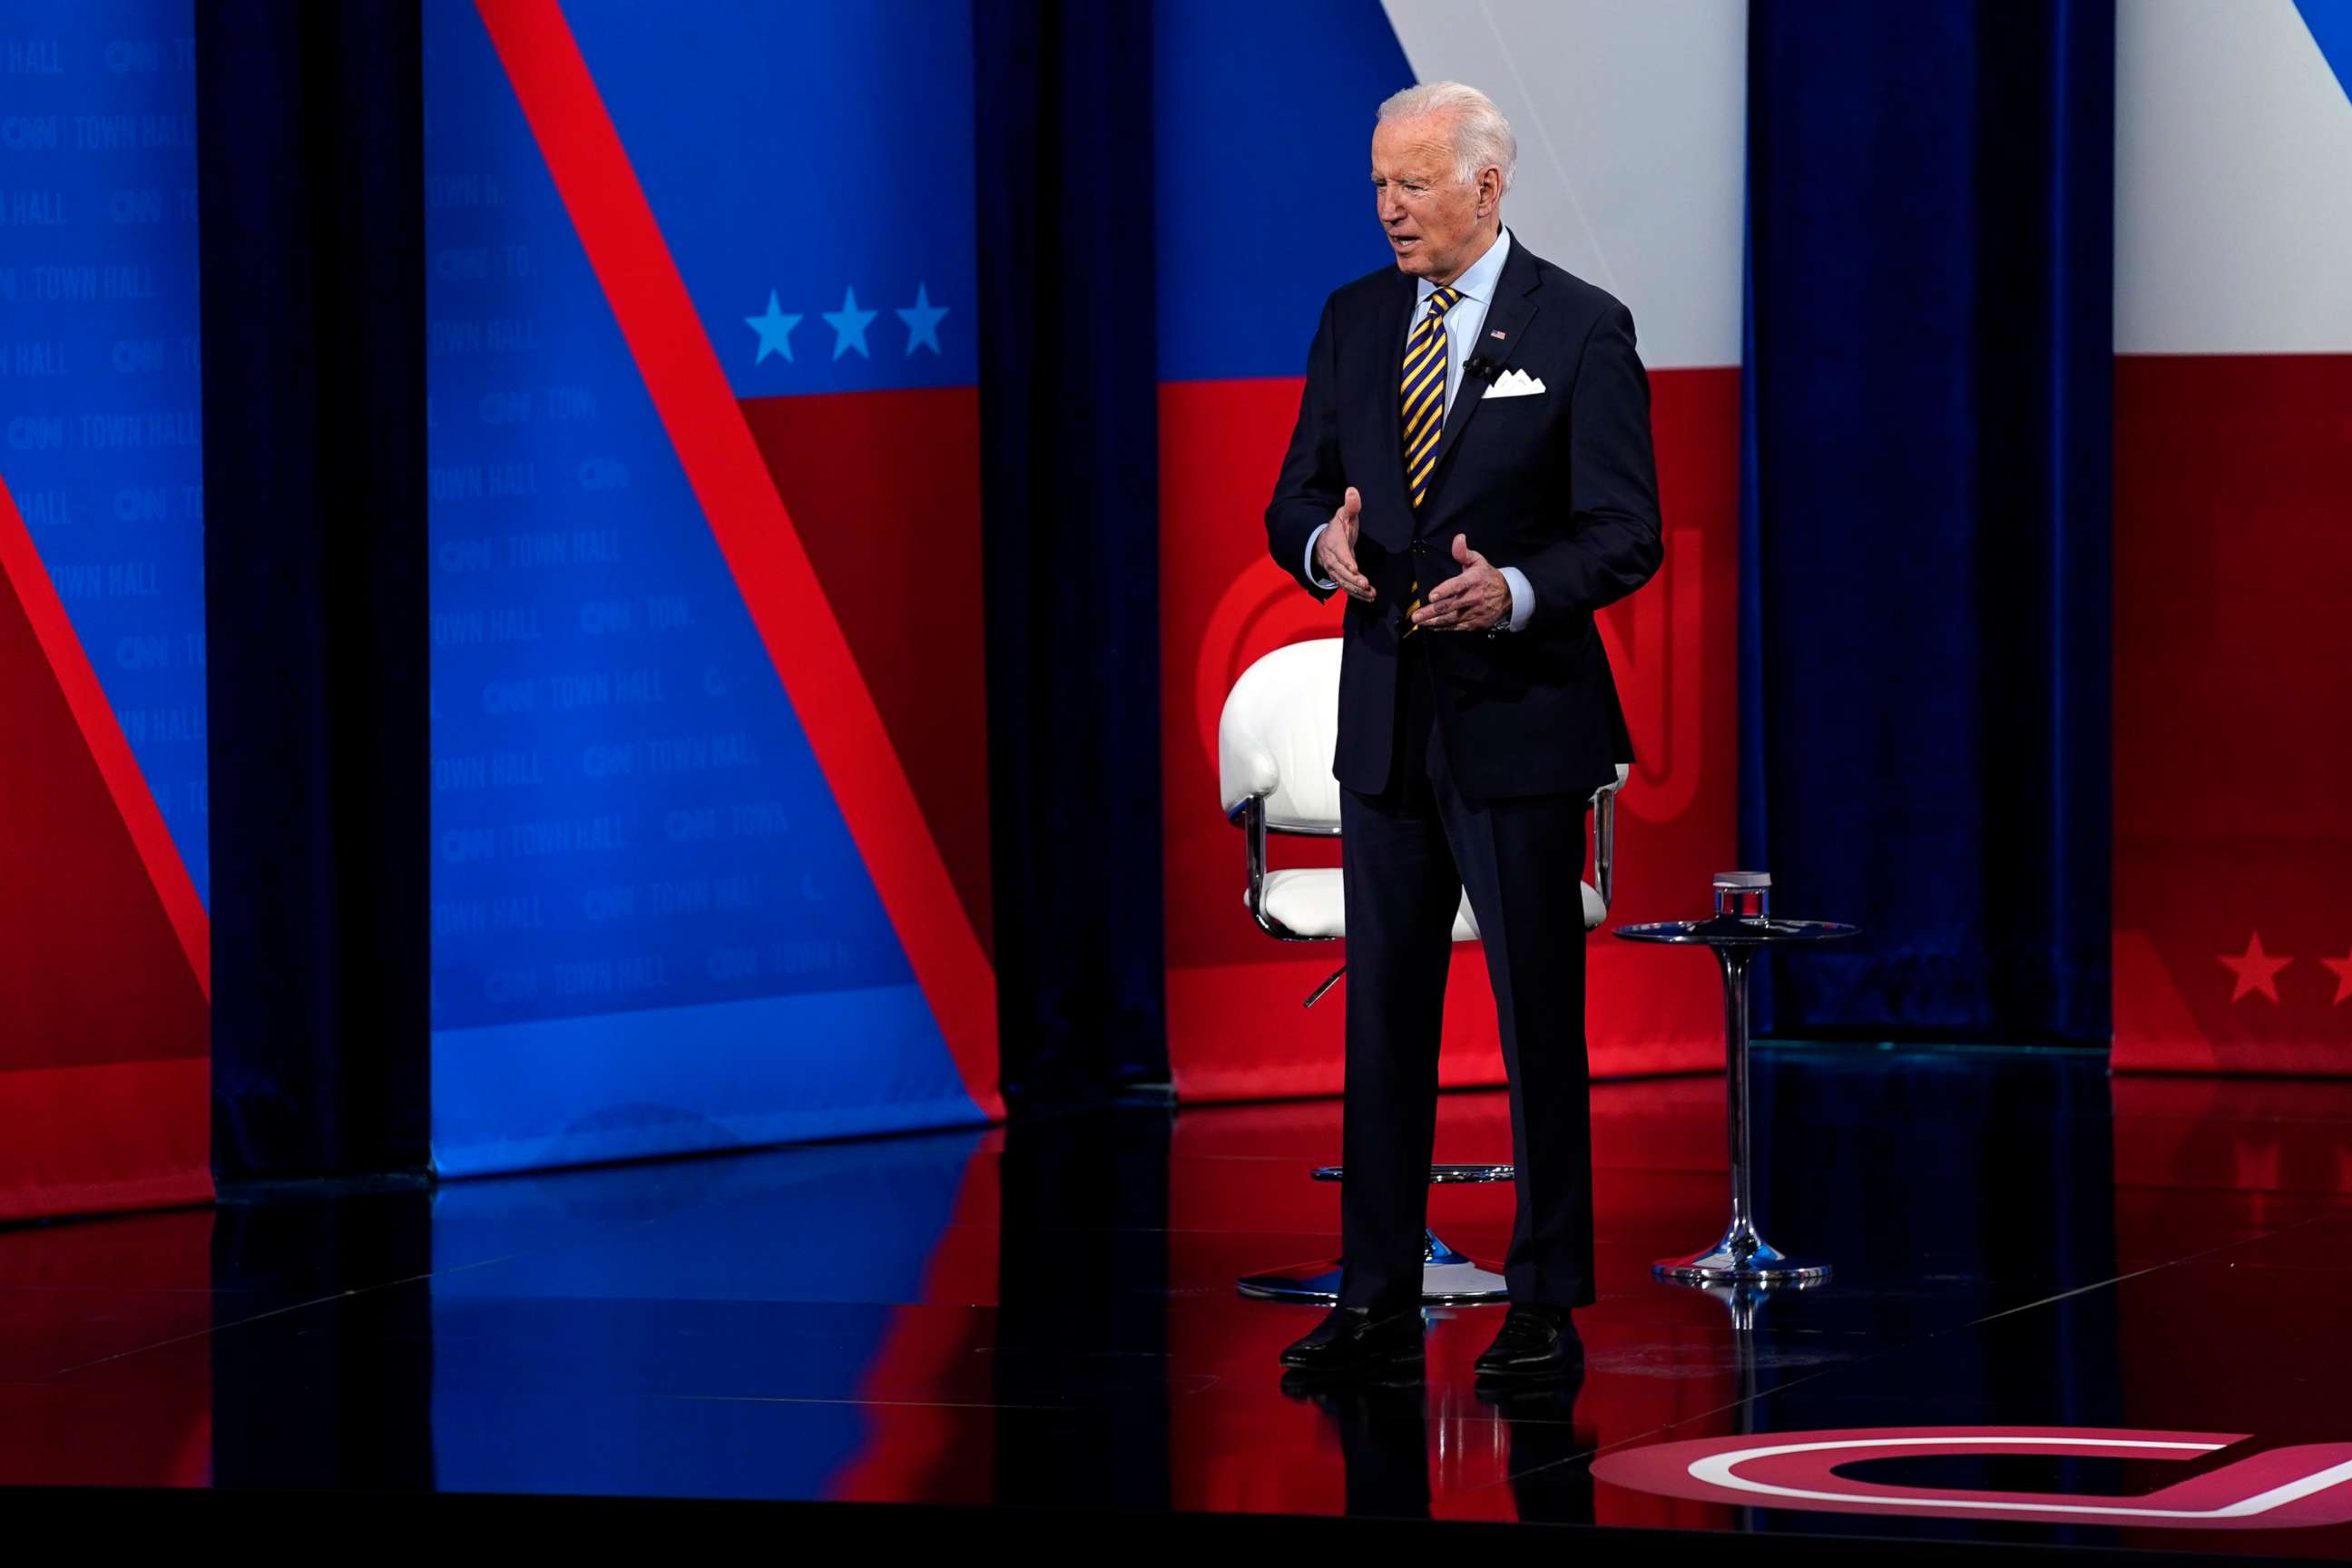 PHOTO: President Joe Biden talks during a televised town hall event at Pabst Theater, Tuesday, Feb. 16, 2021, in Milwaukee.